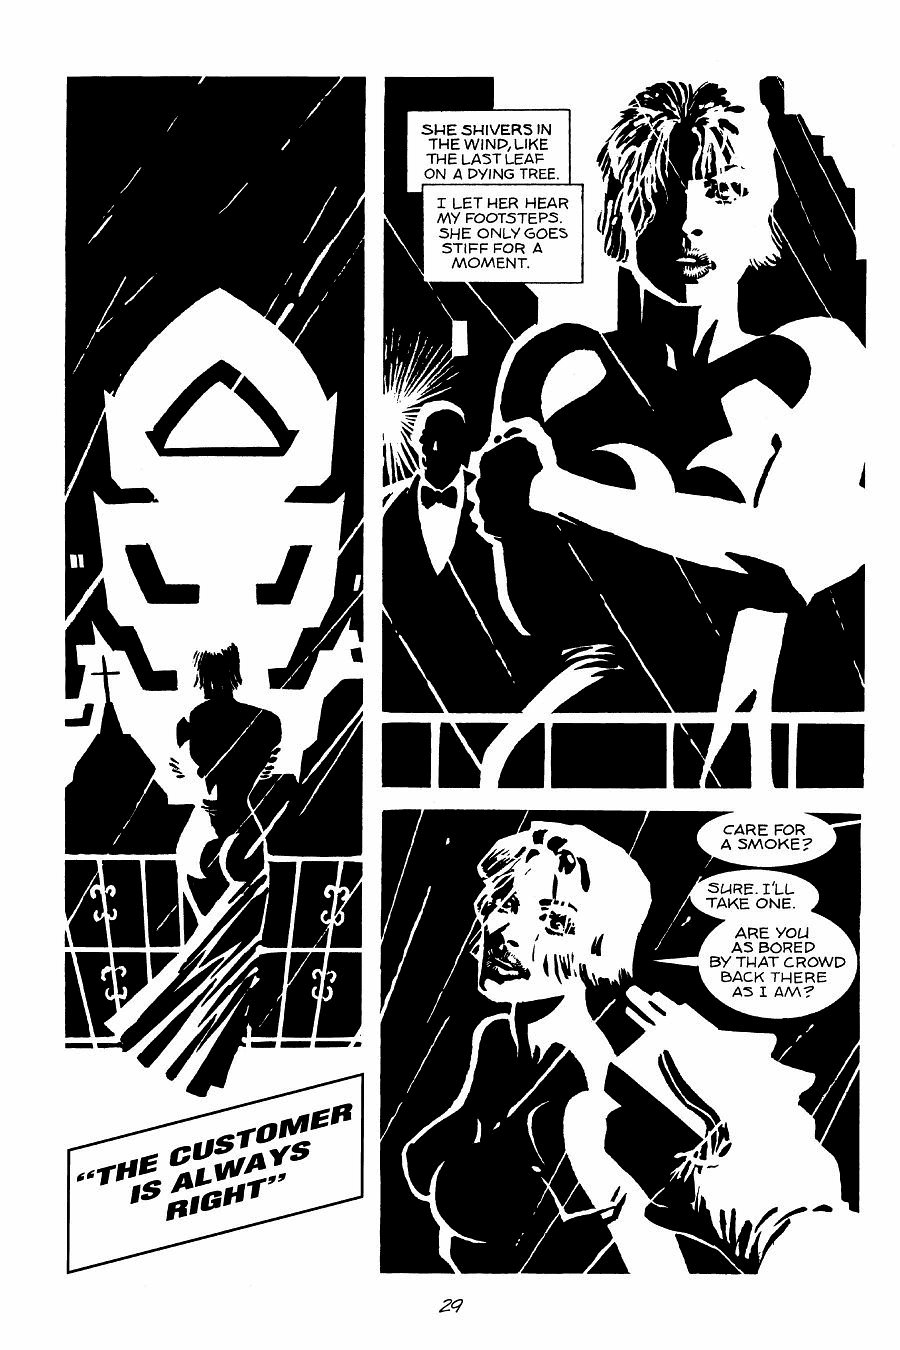 page 29 of sin city 6 booze broads and bullets